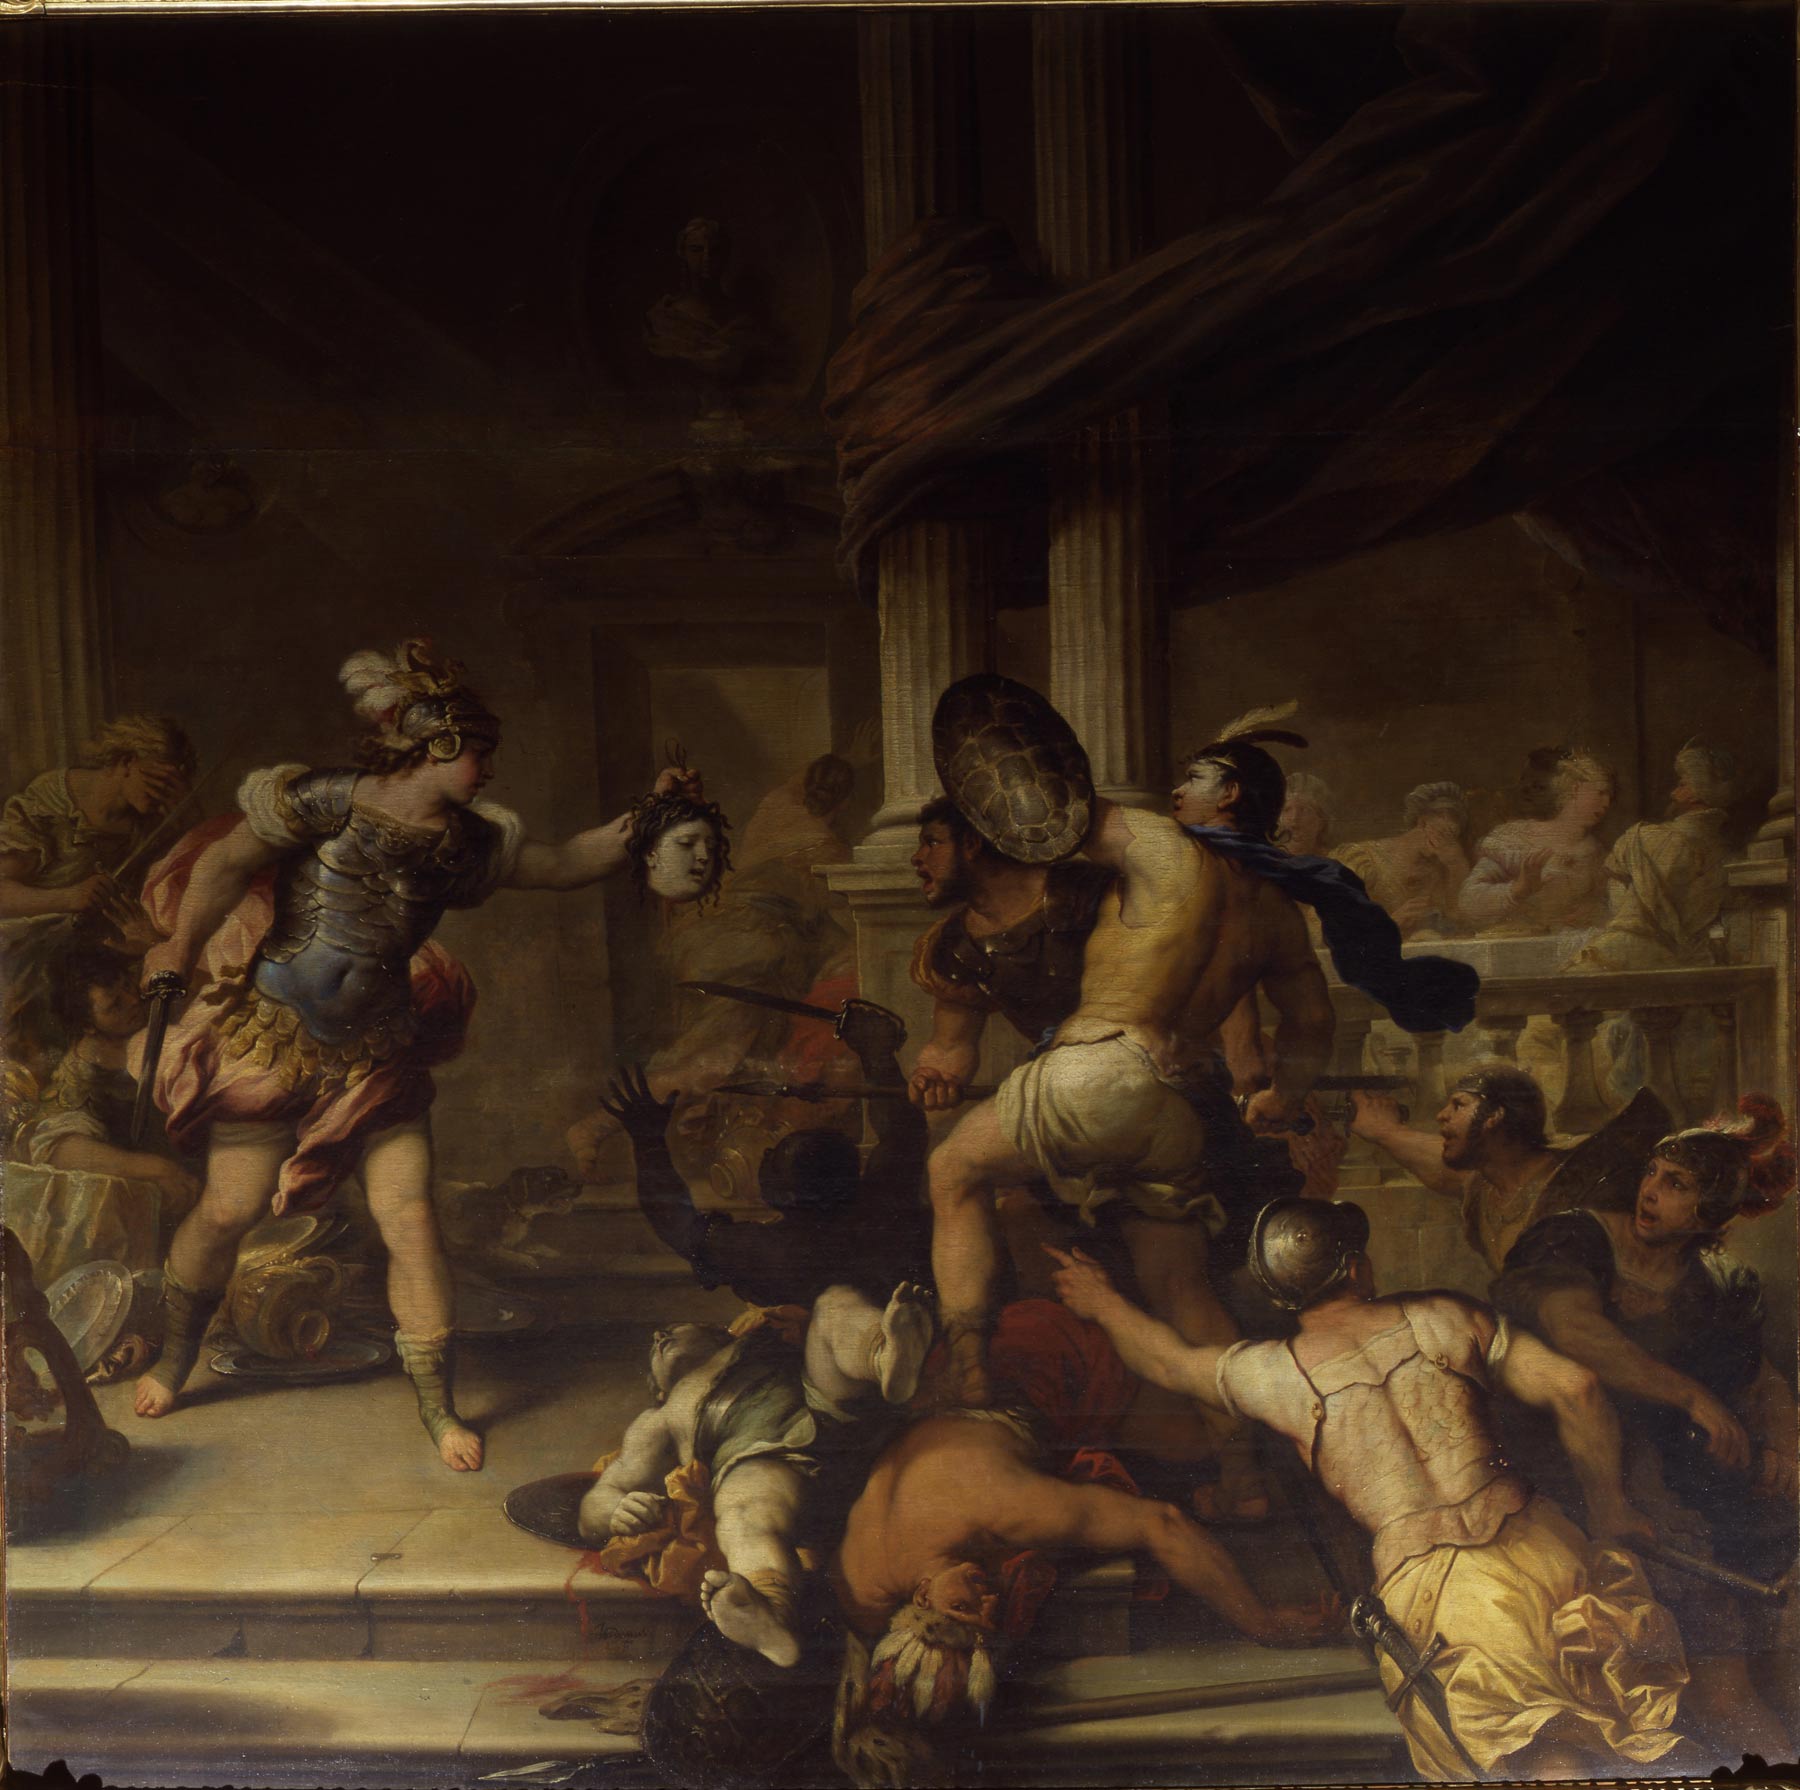 Luca Giordano, Struggle between Perseus and Phineas (ca. 1680; oil on canvas; Genoa, Palazzo Reale)